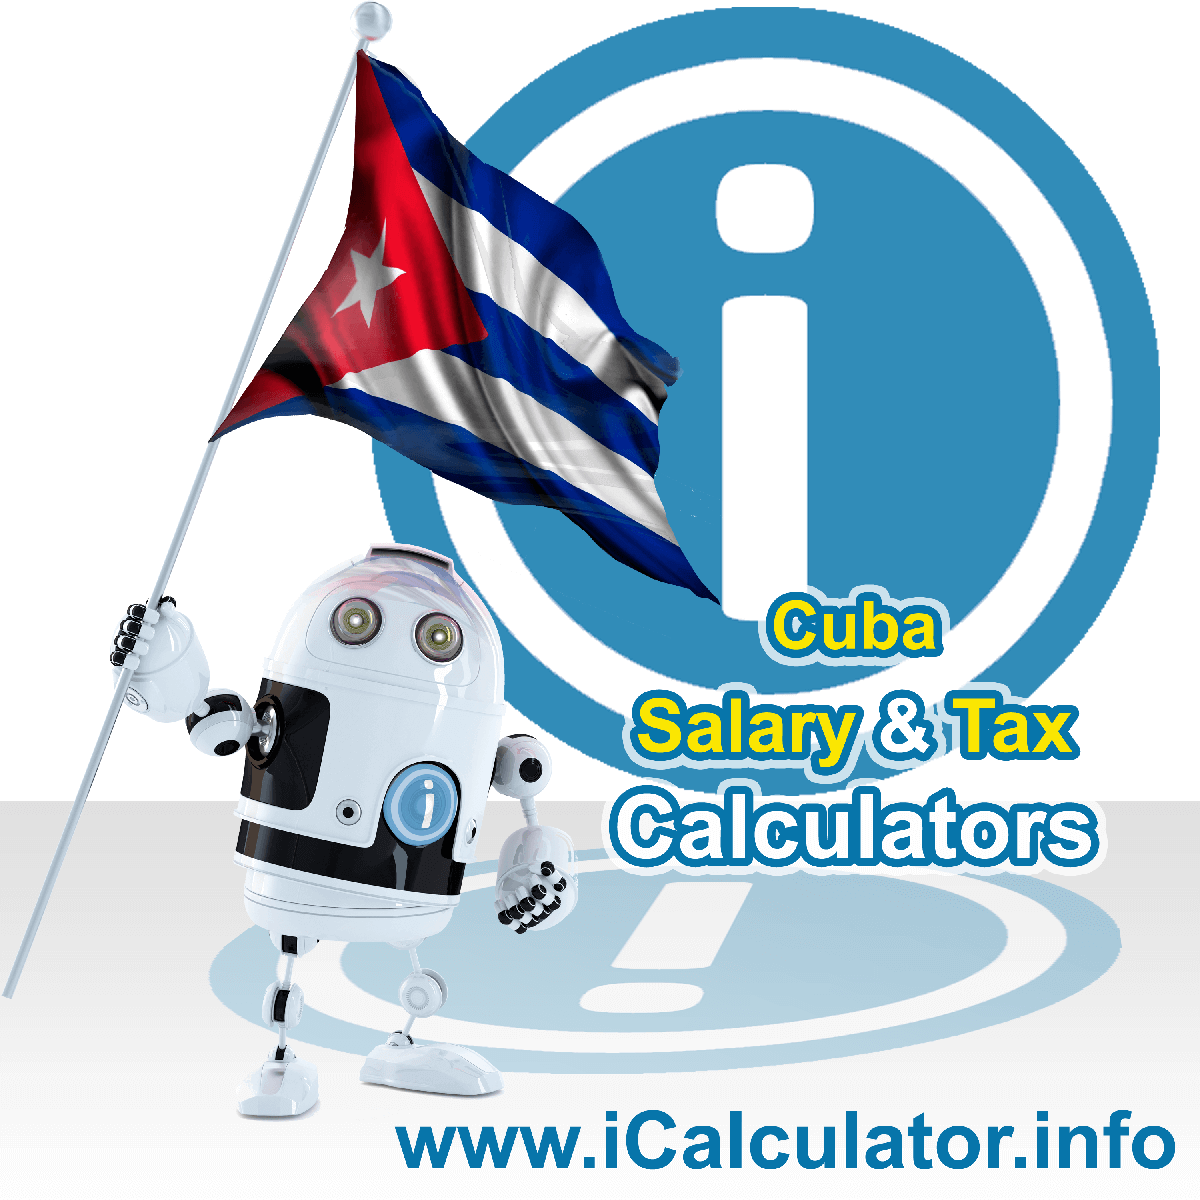 Cuba Tax Calculator. This image shows the Cuba flag and information relating to the tax formula for the Cuba Salary Calculator